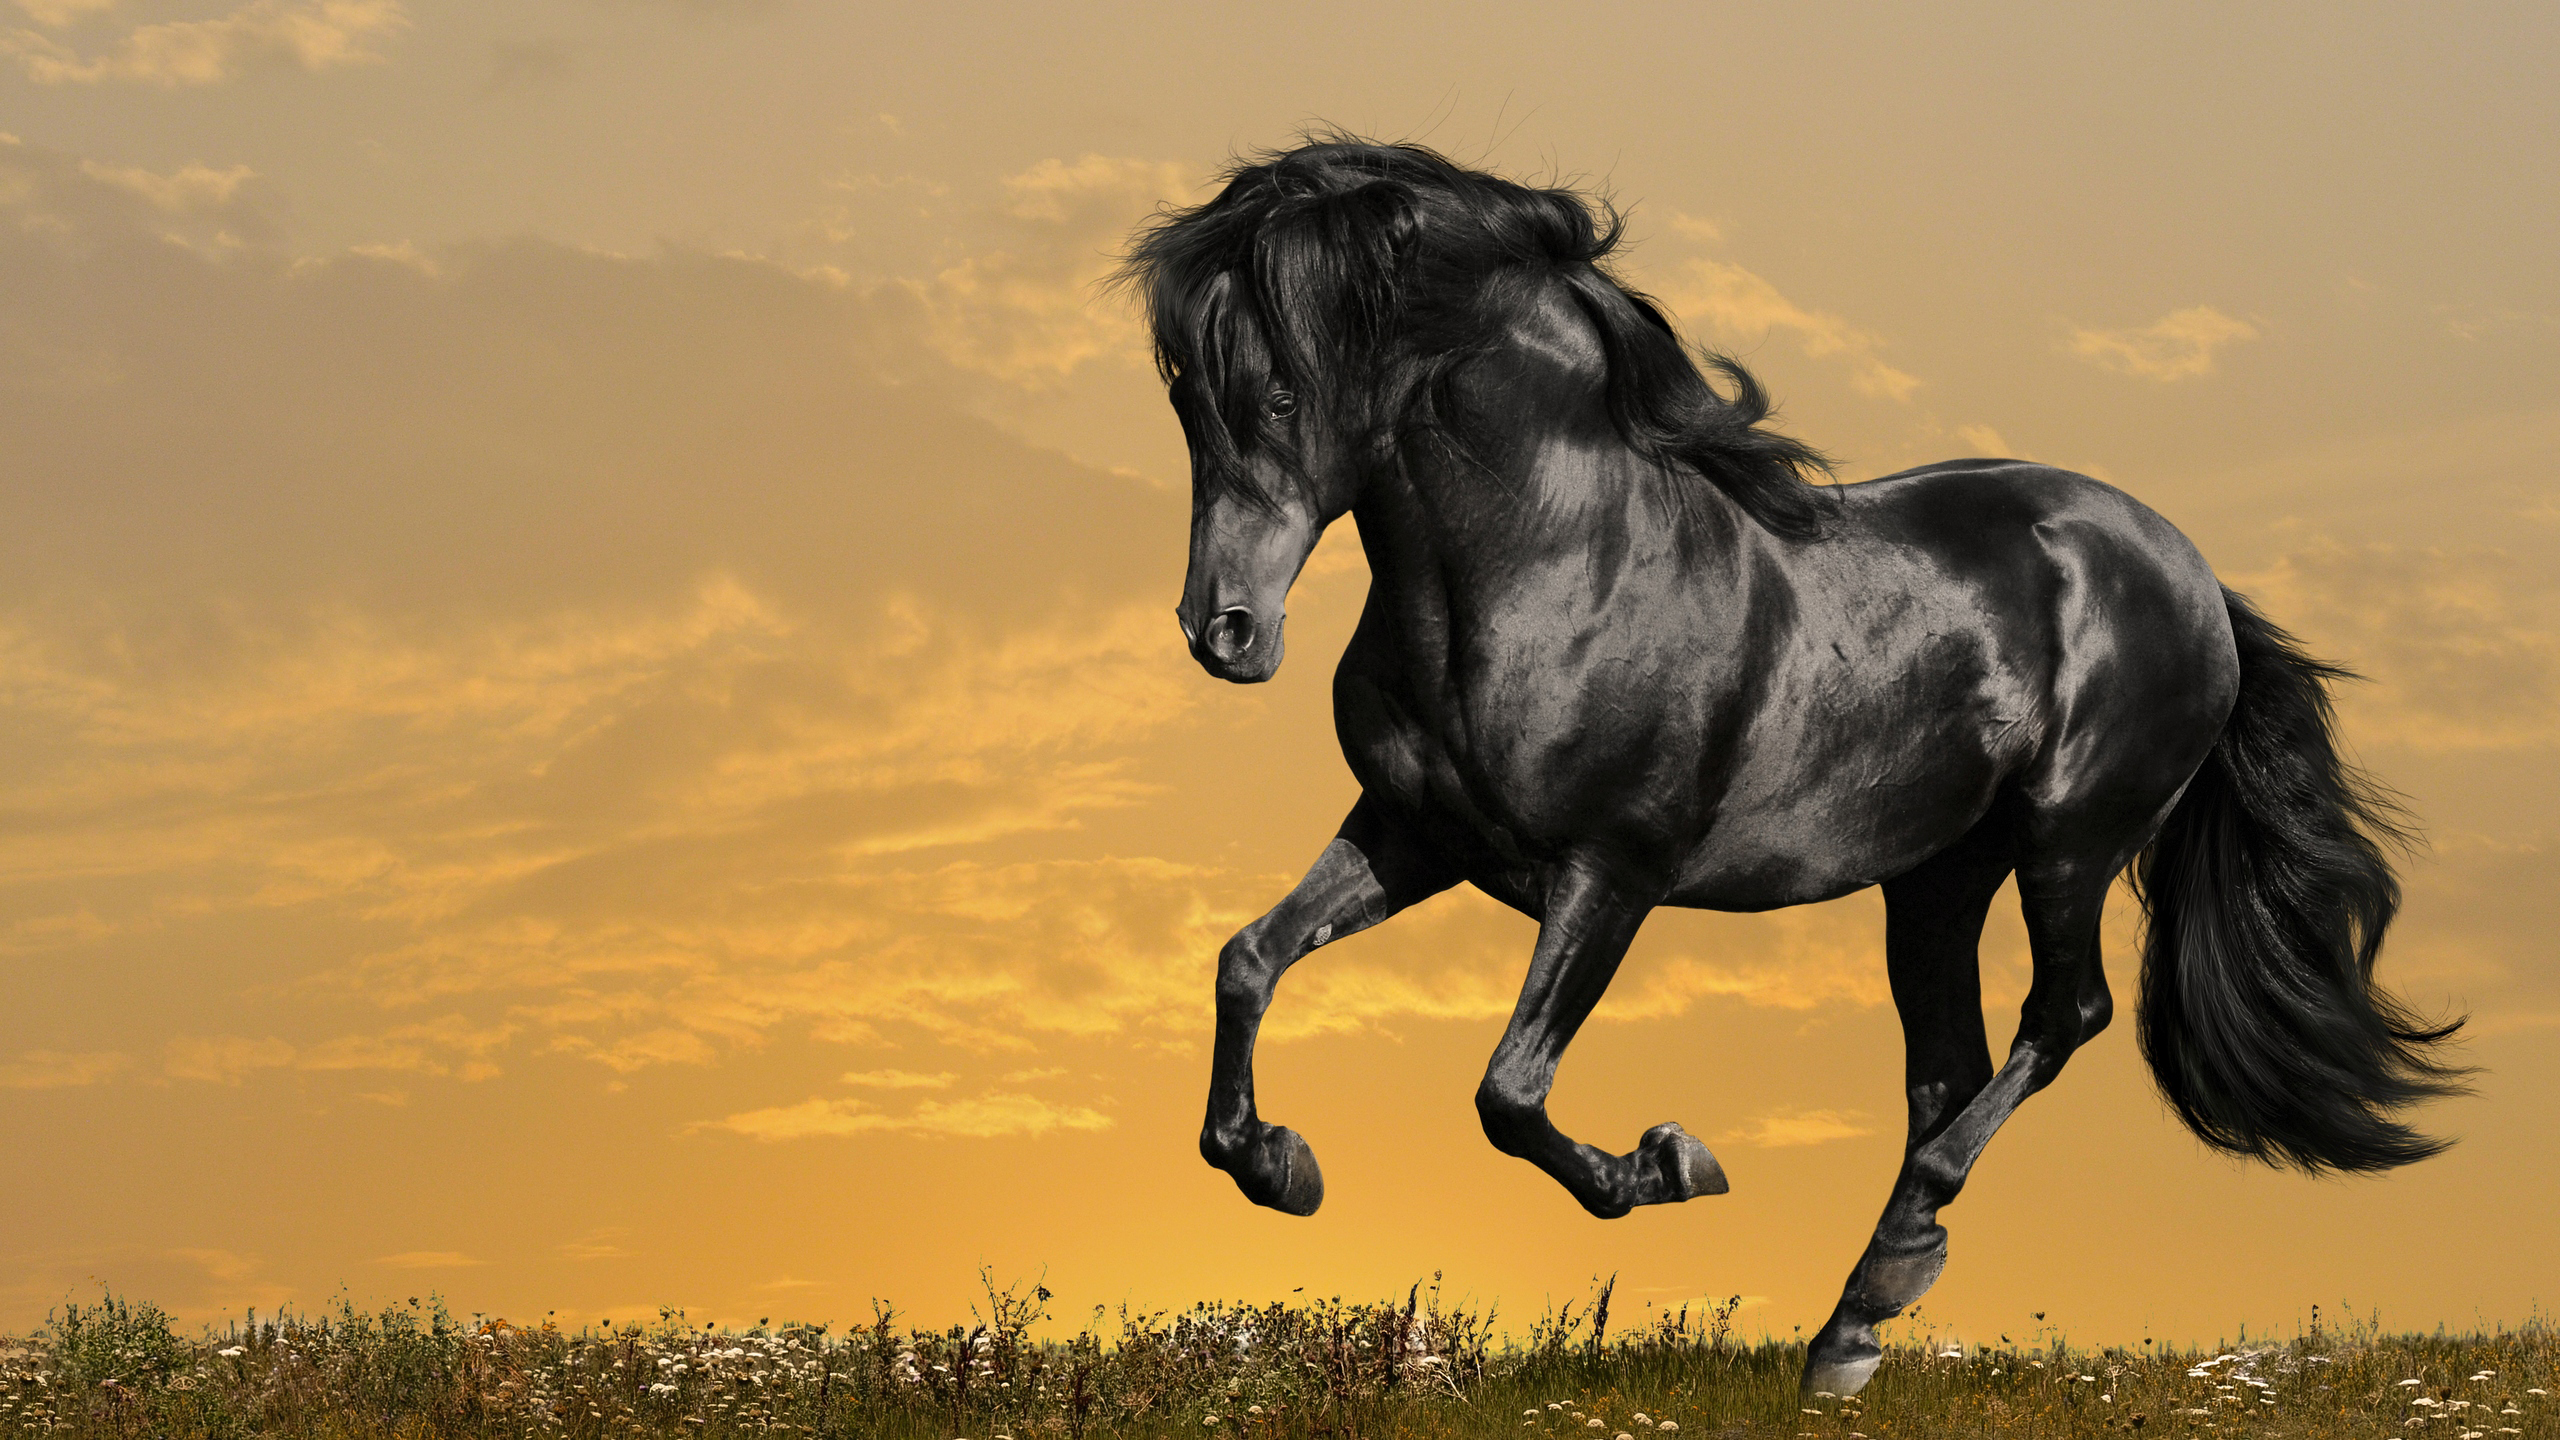 Black Horse With Cloudy Sky Wallpaper 2K Horse